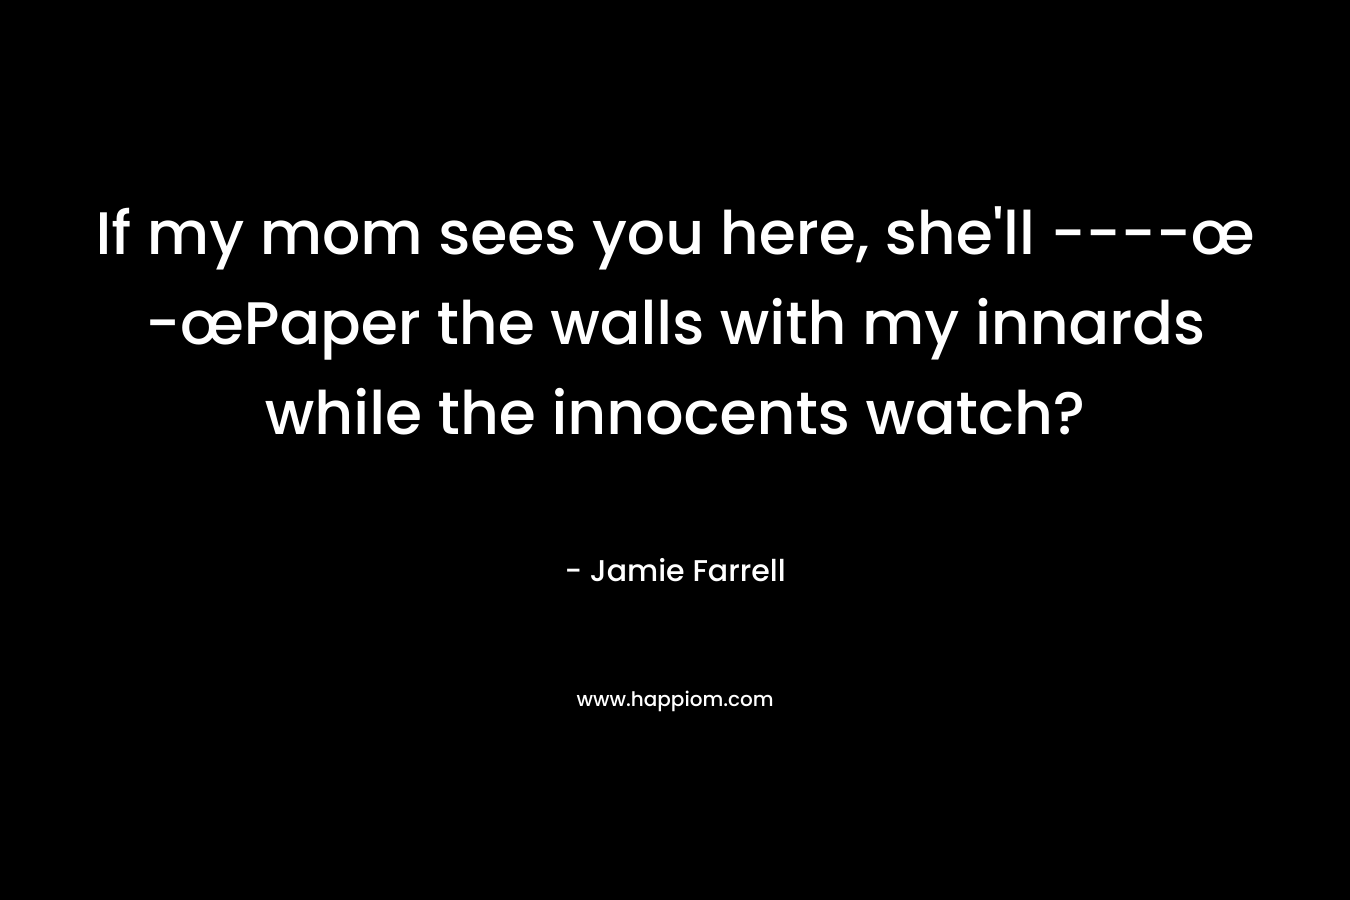 If my mom sees you here, she'll ----œ	-œPaper the walls with my innards while the innocents watch?